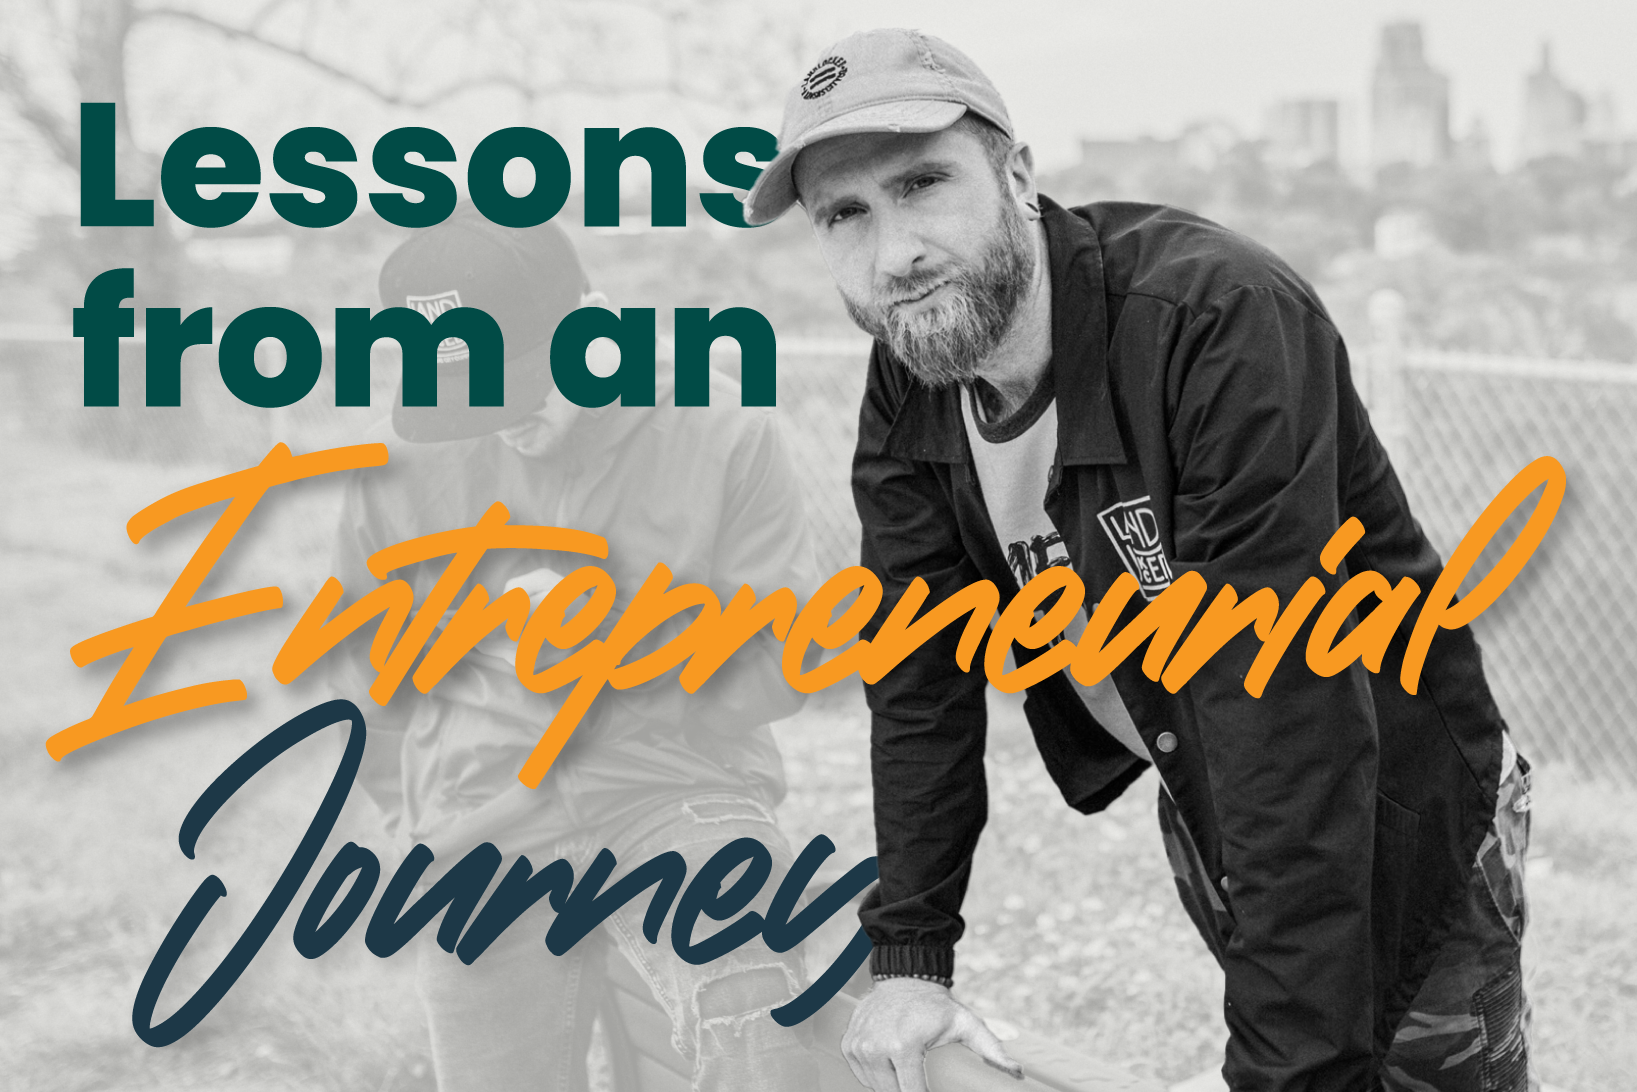 Lessons from an Entrepreneurial Journey